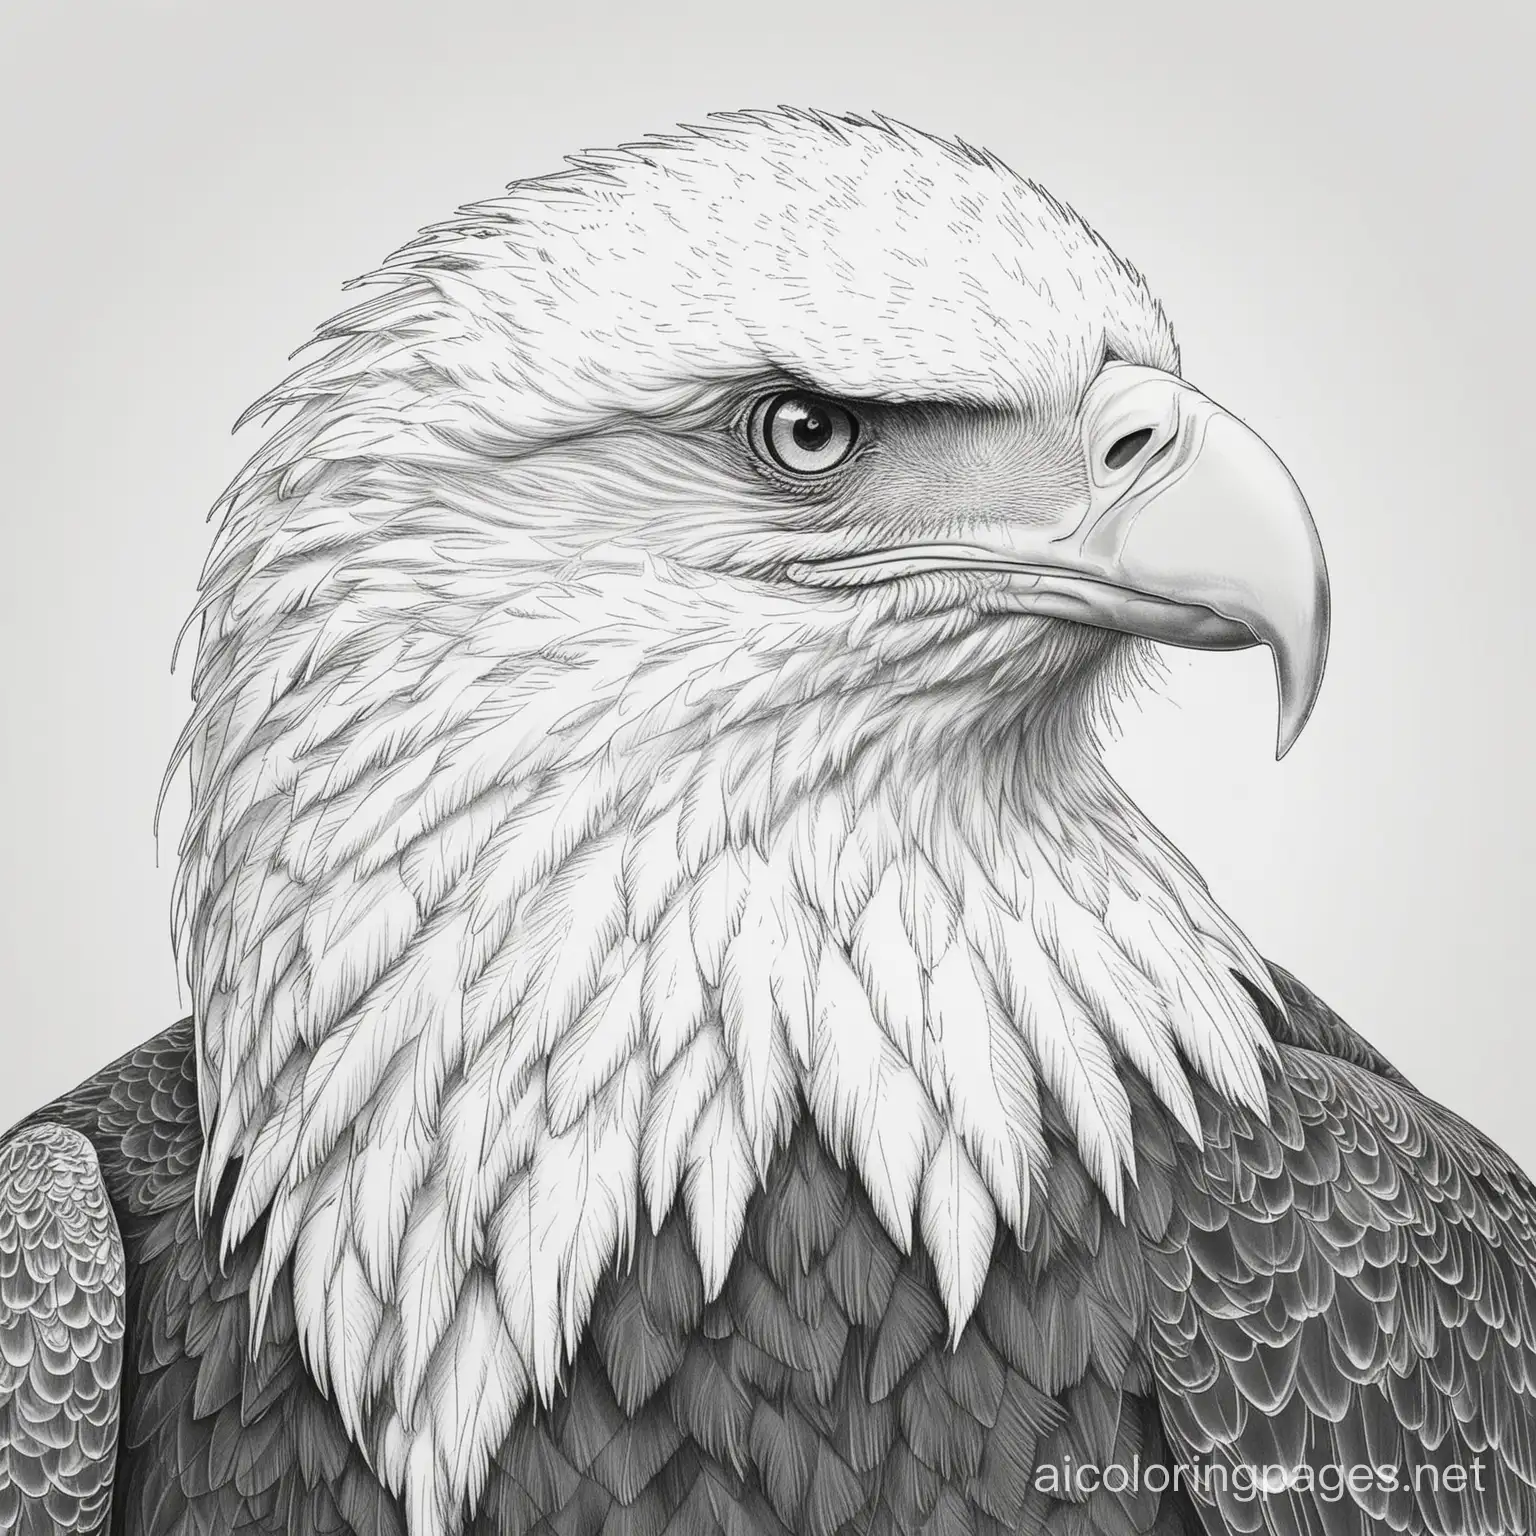 BALD EAGLE PORTRAIT

, Coloring Page, black and white, line art, white background, Simplicity, Ample White Space. The background of the coloring page is plain white to make it easy for young children to color within the lines. The outlines of all the subjects are easy to distinguish, making it simple for kids to color without too much difficulty